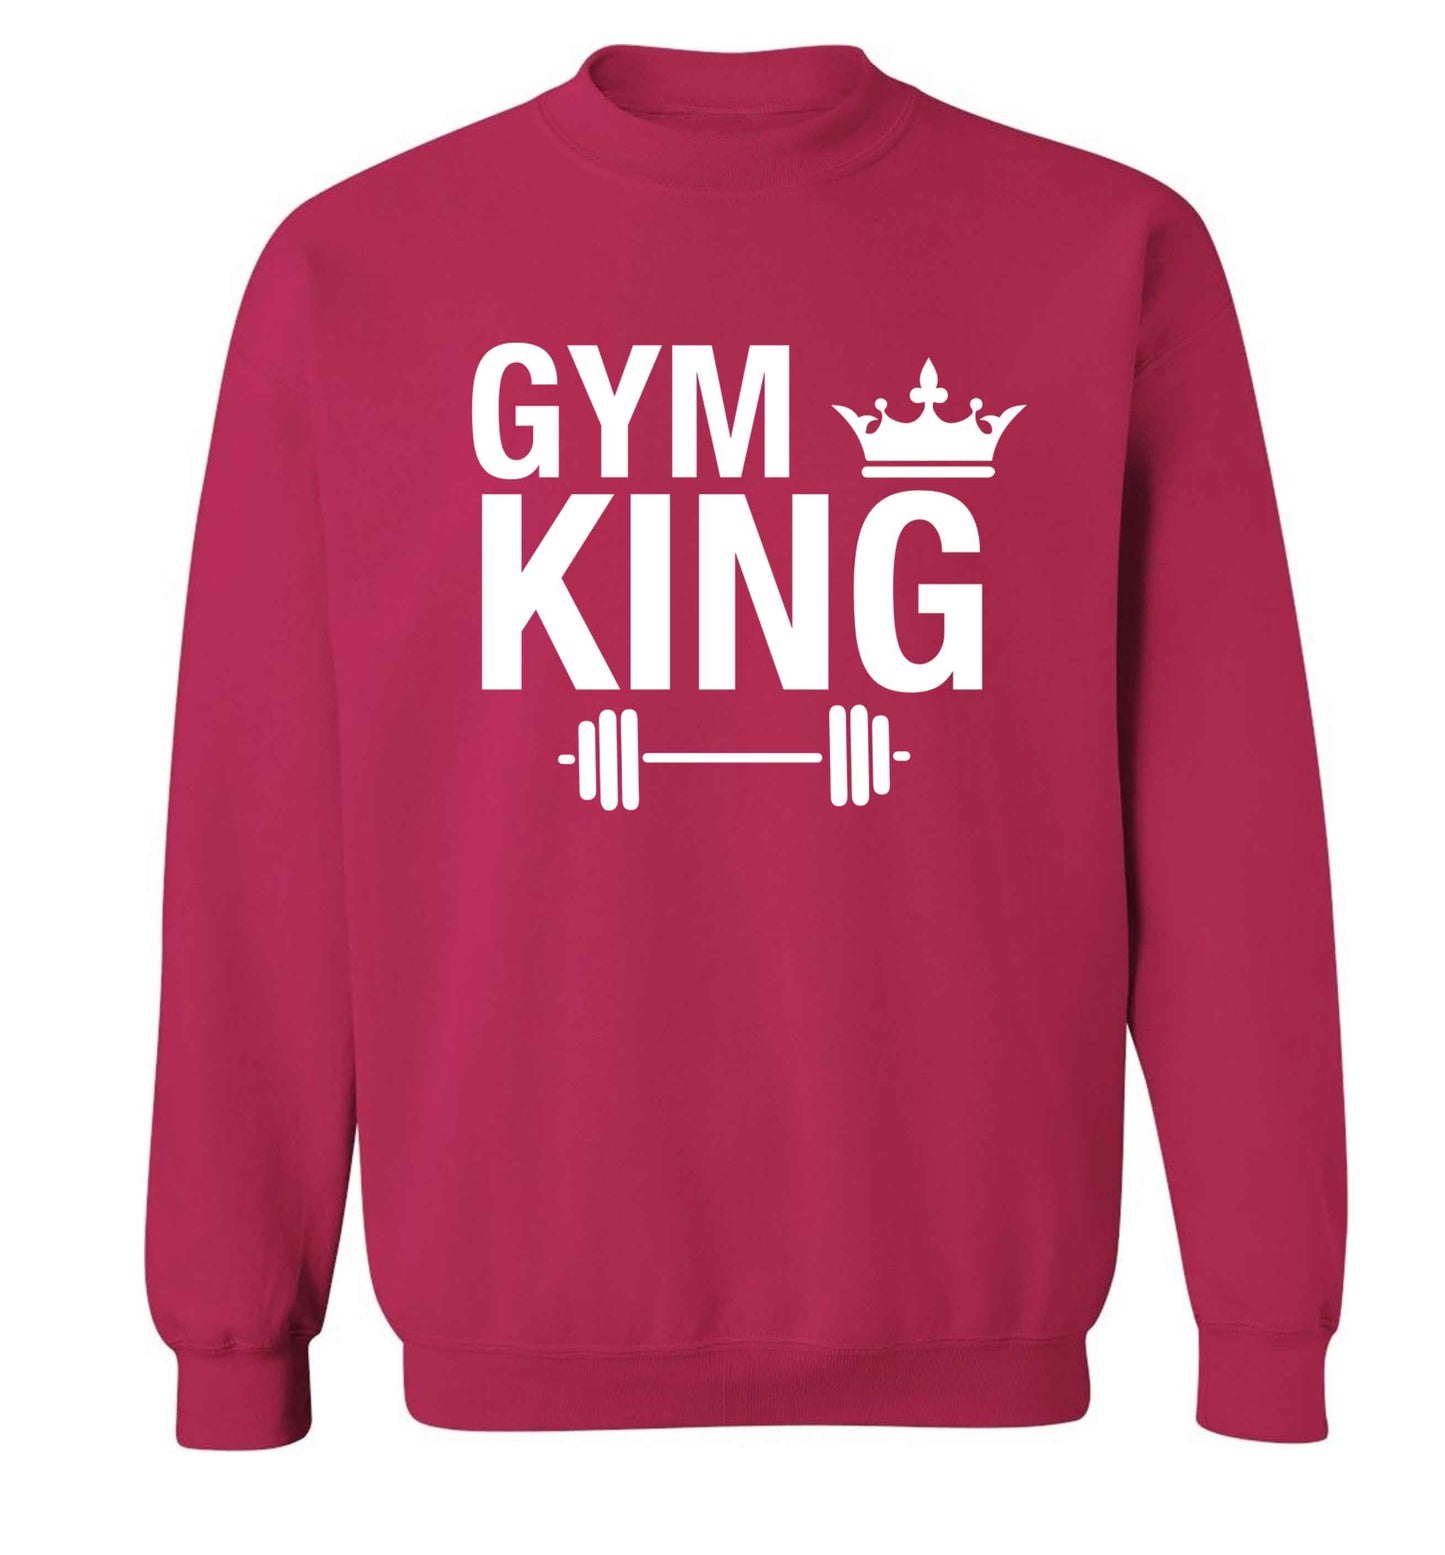 Gym king Adult's unisex pink Sweater 2XL